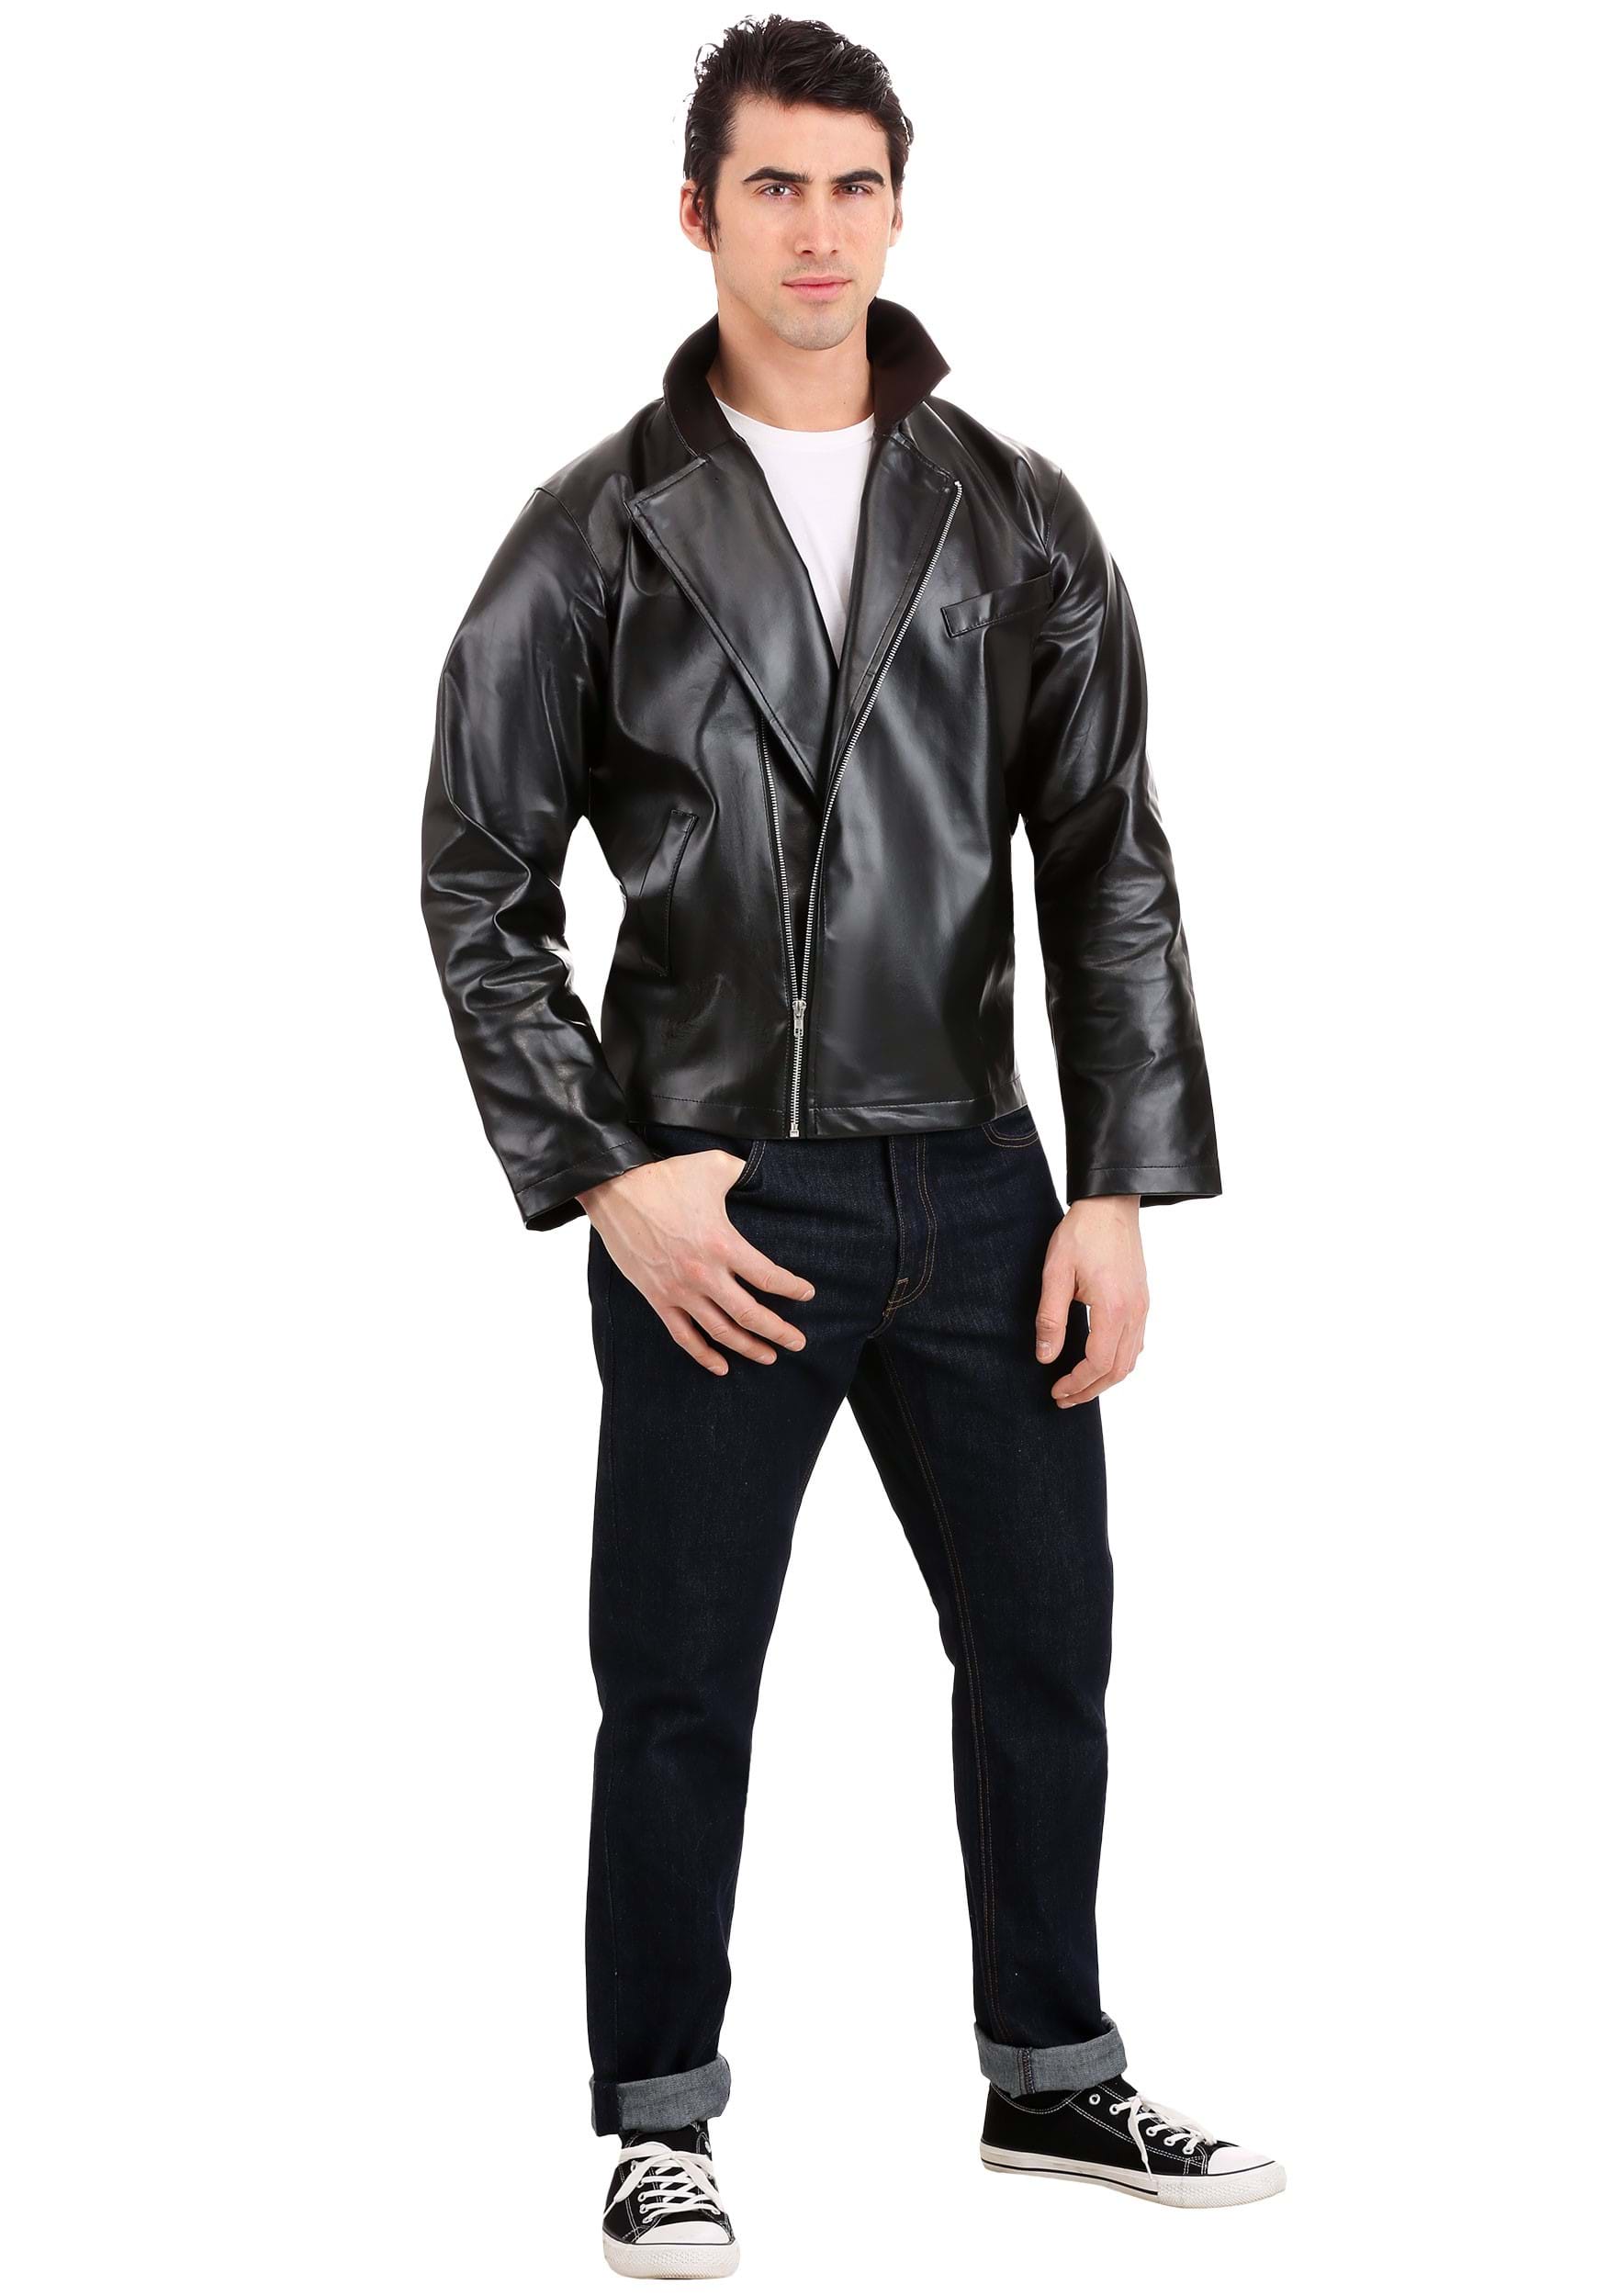 Image of FUN Costumes Grease T-Birds Jacket Plus Size Costume